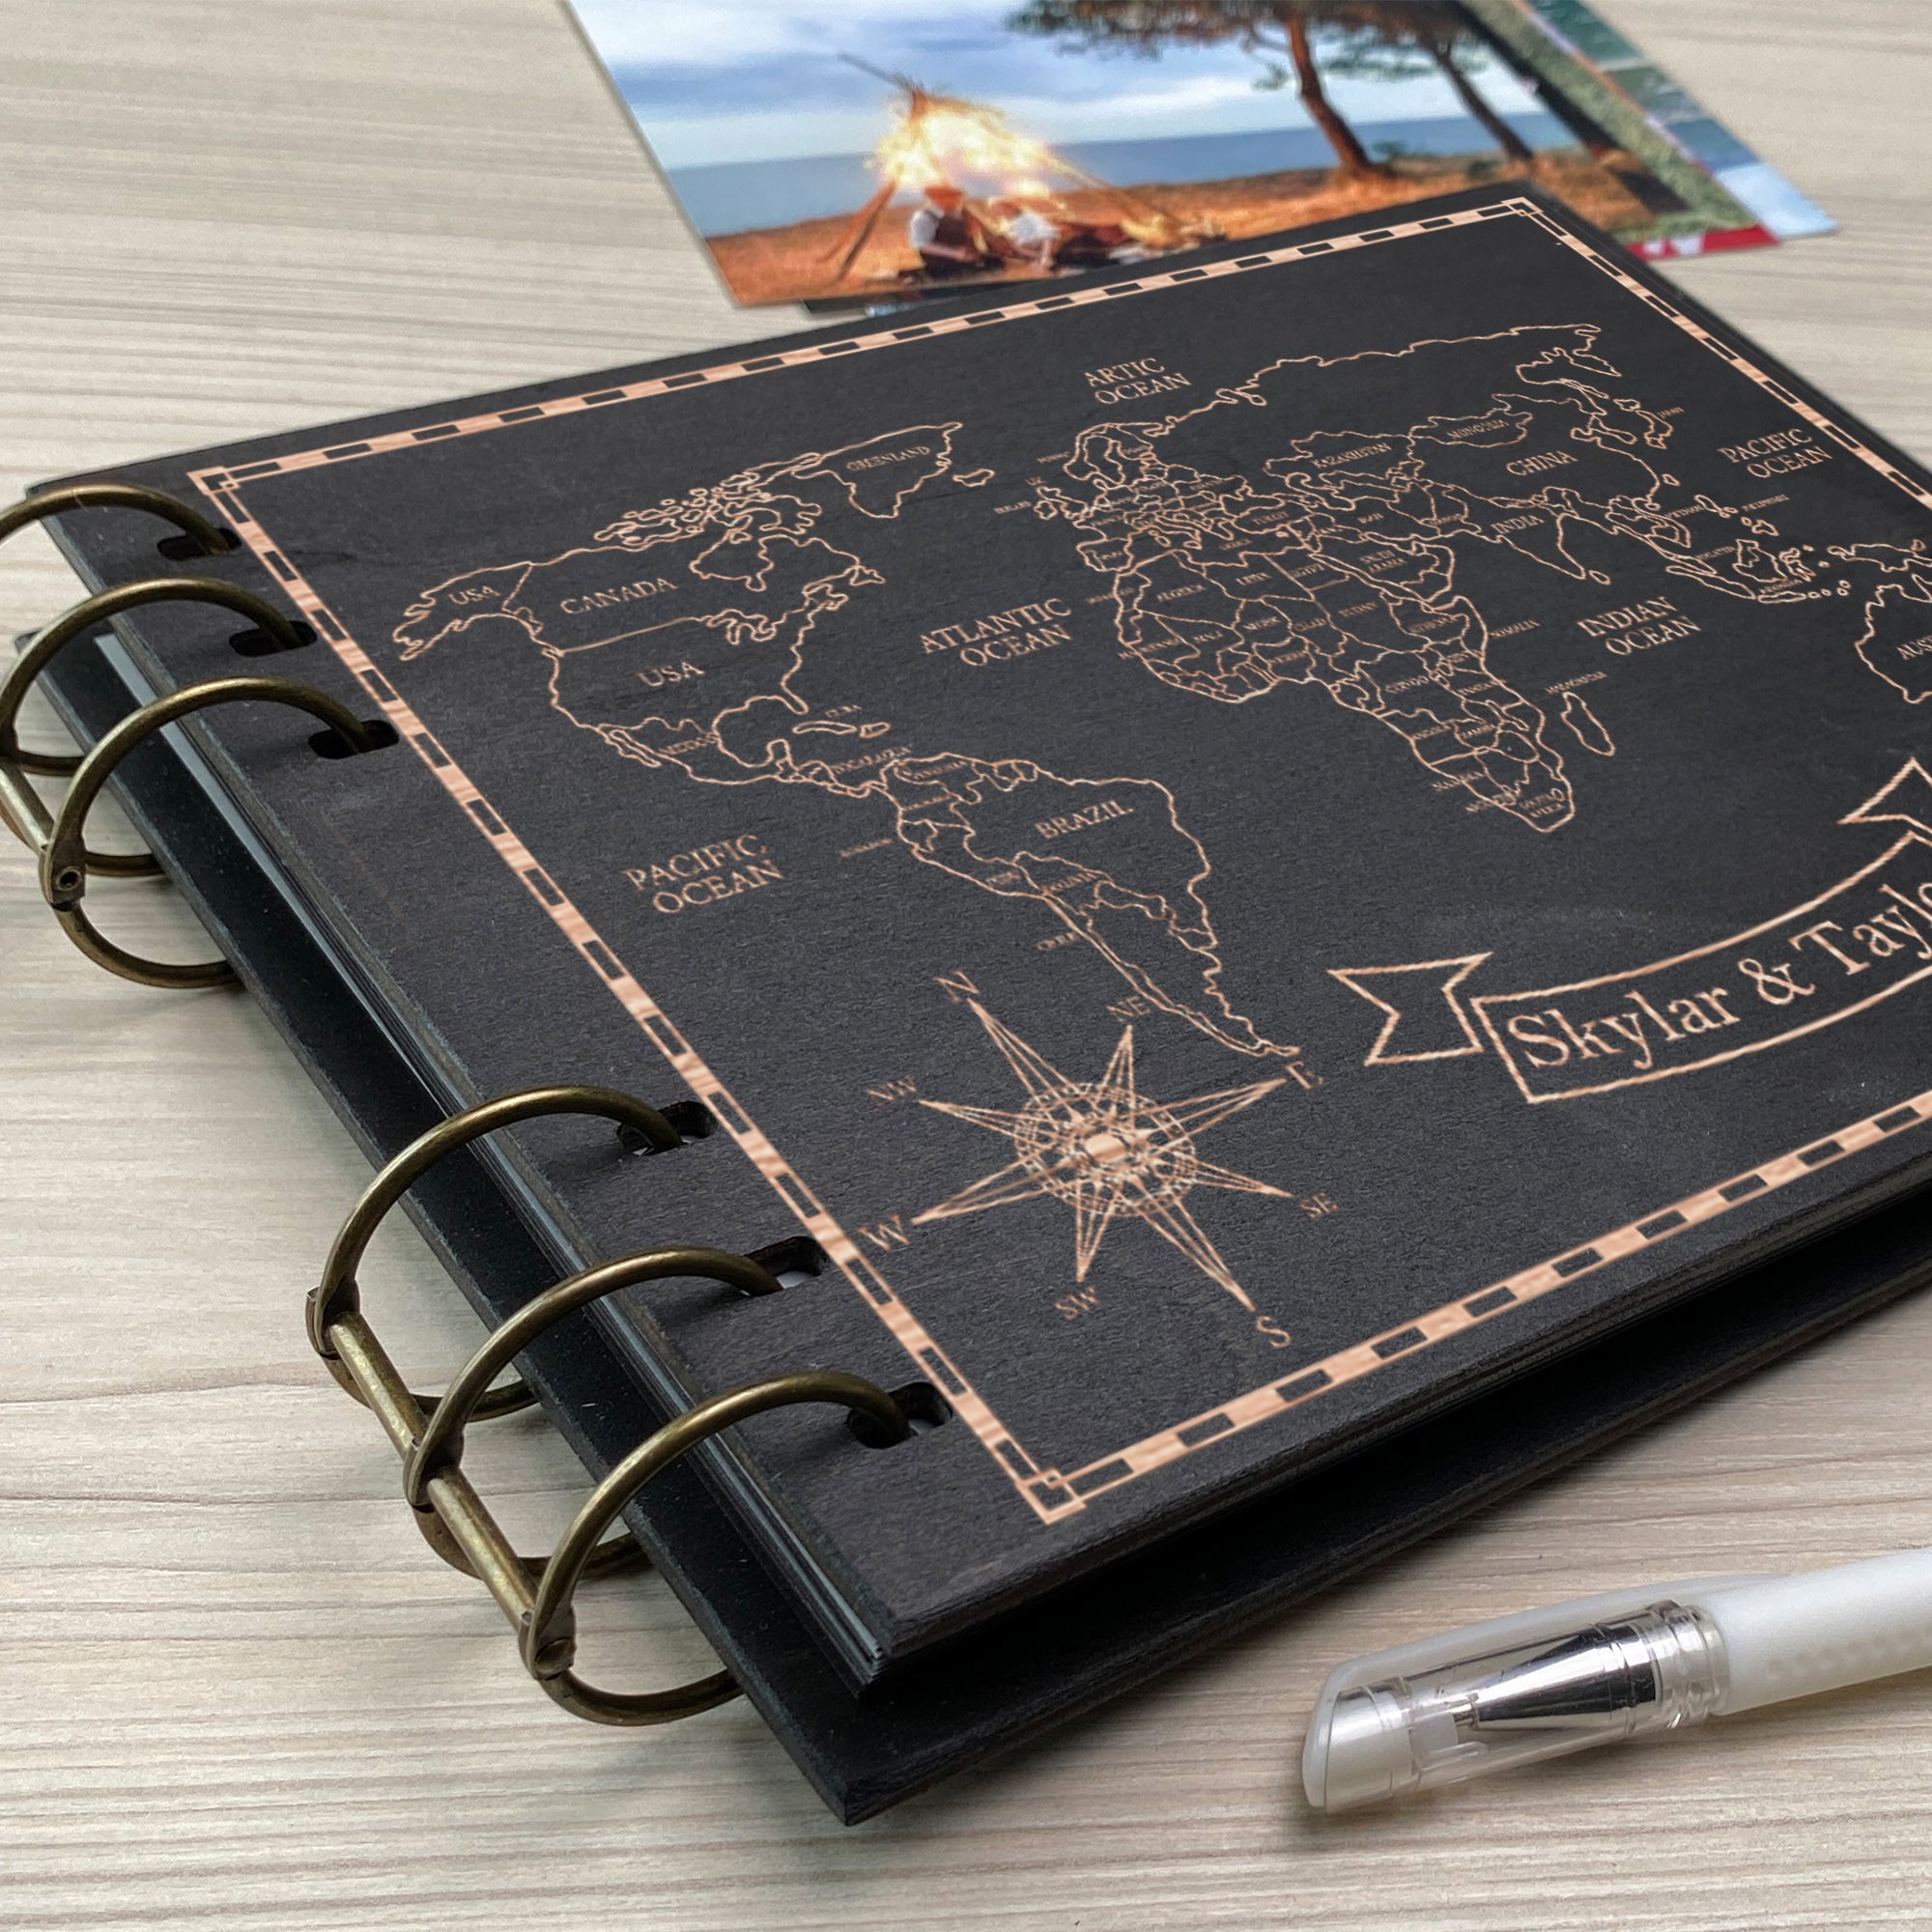 Personalized photo album cover and Zero meridian map engraving